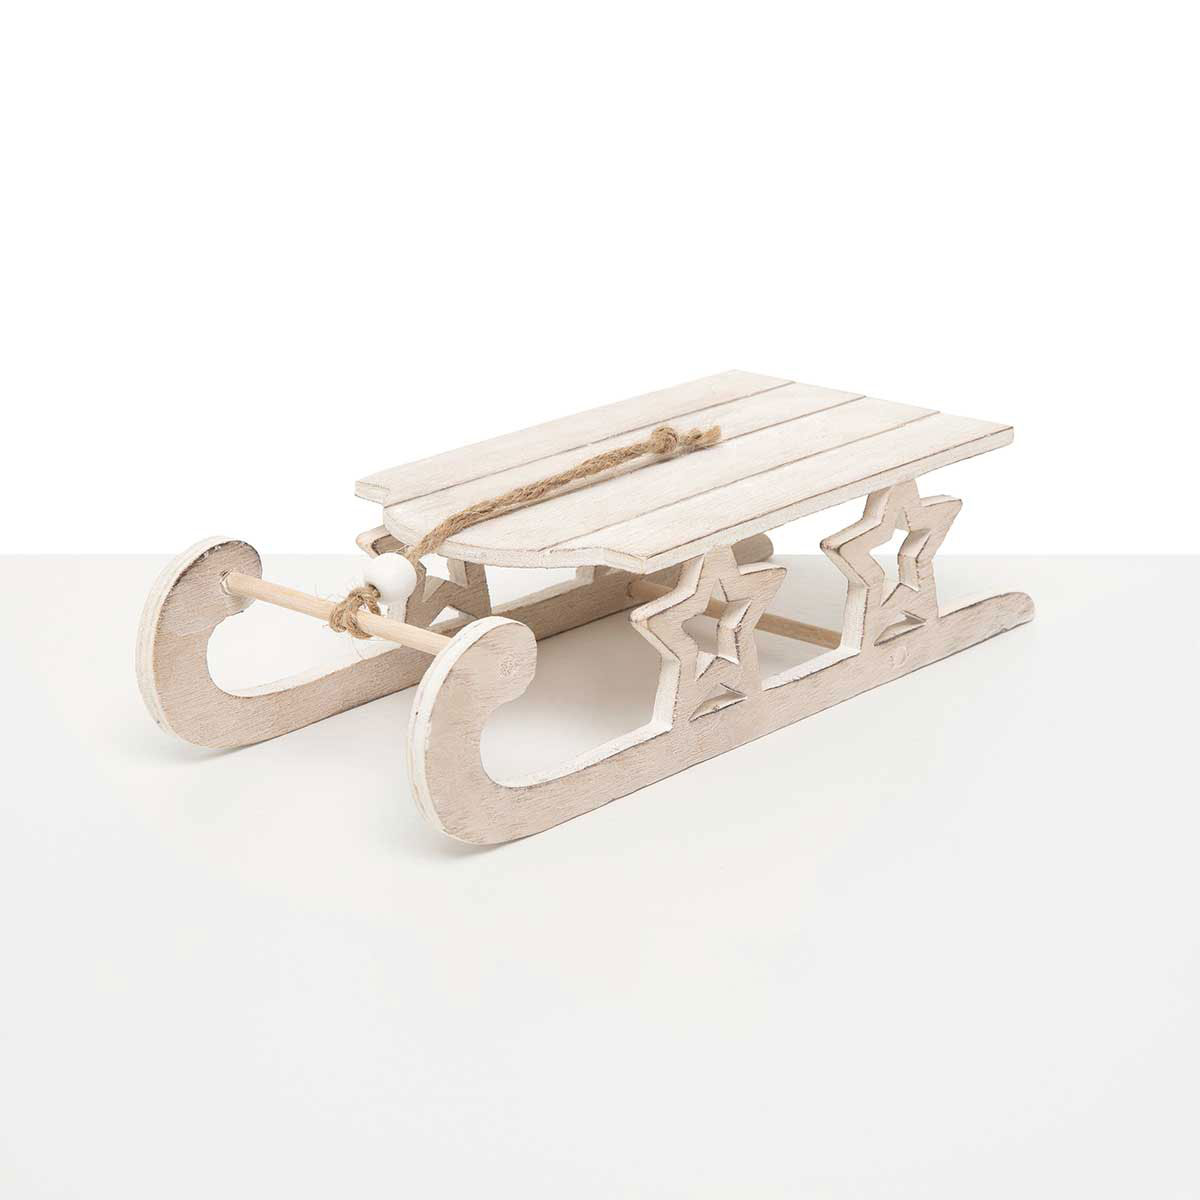 SLED NATURAL SMALL 3.75IN X 2.25IN X 9.25IN - Click Image to Close